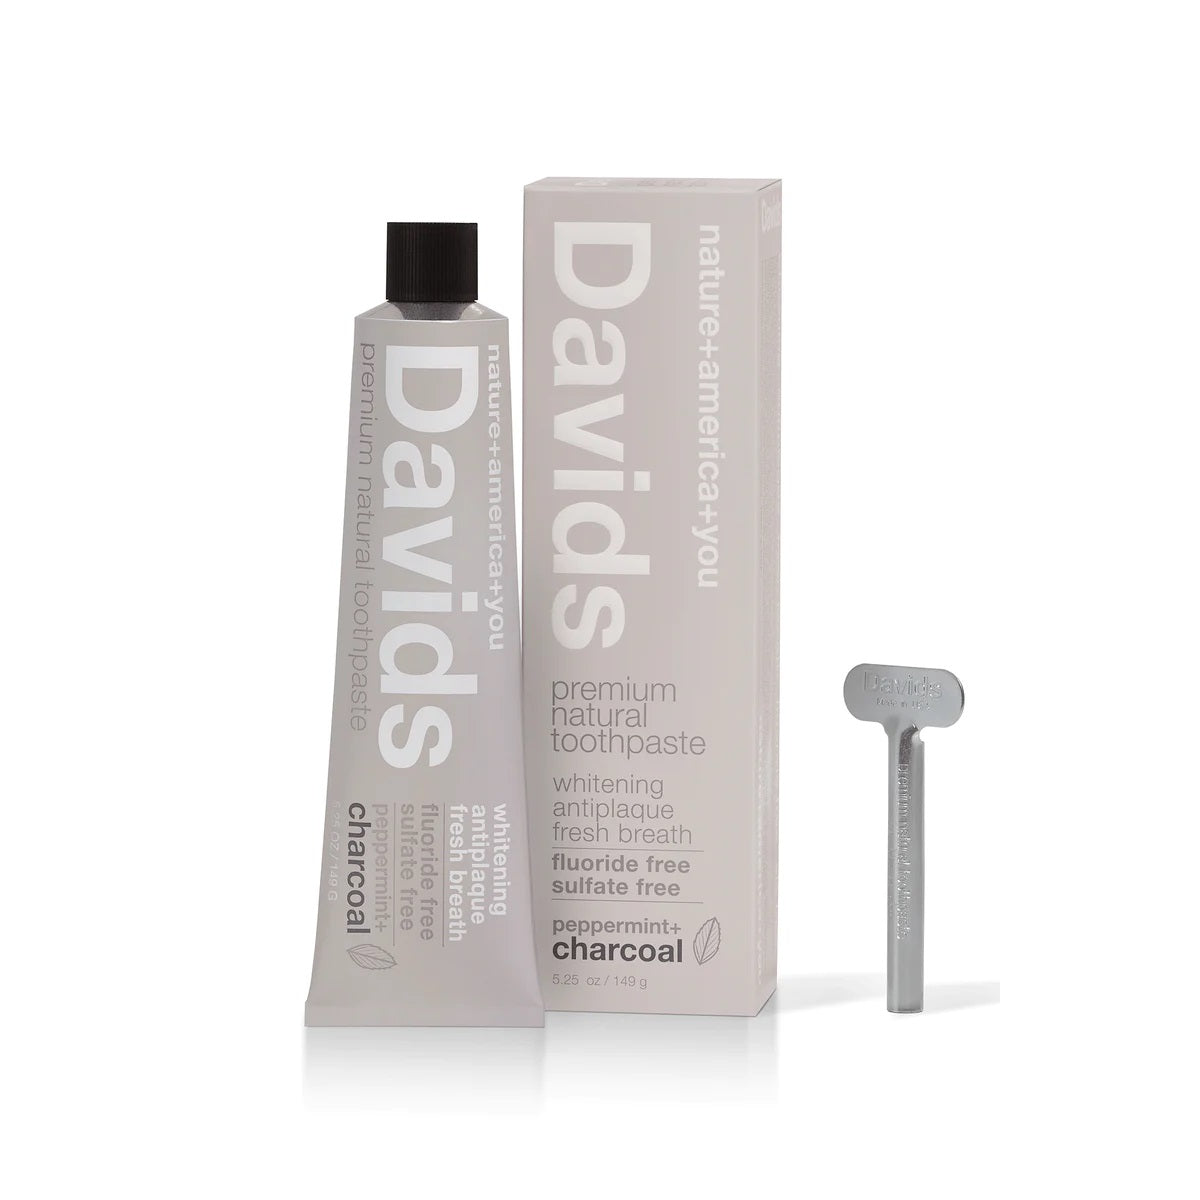 DAVID'S NATURAL TOOTHPASTE Davids Premium Natural Toothpaste Charcoal Peppermint full size